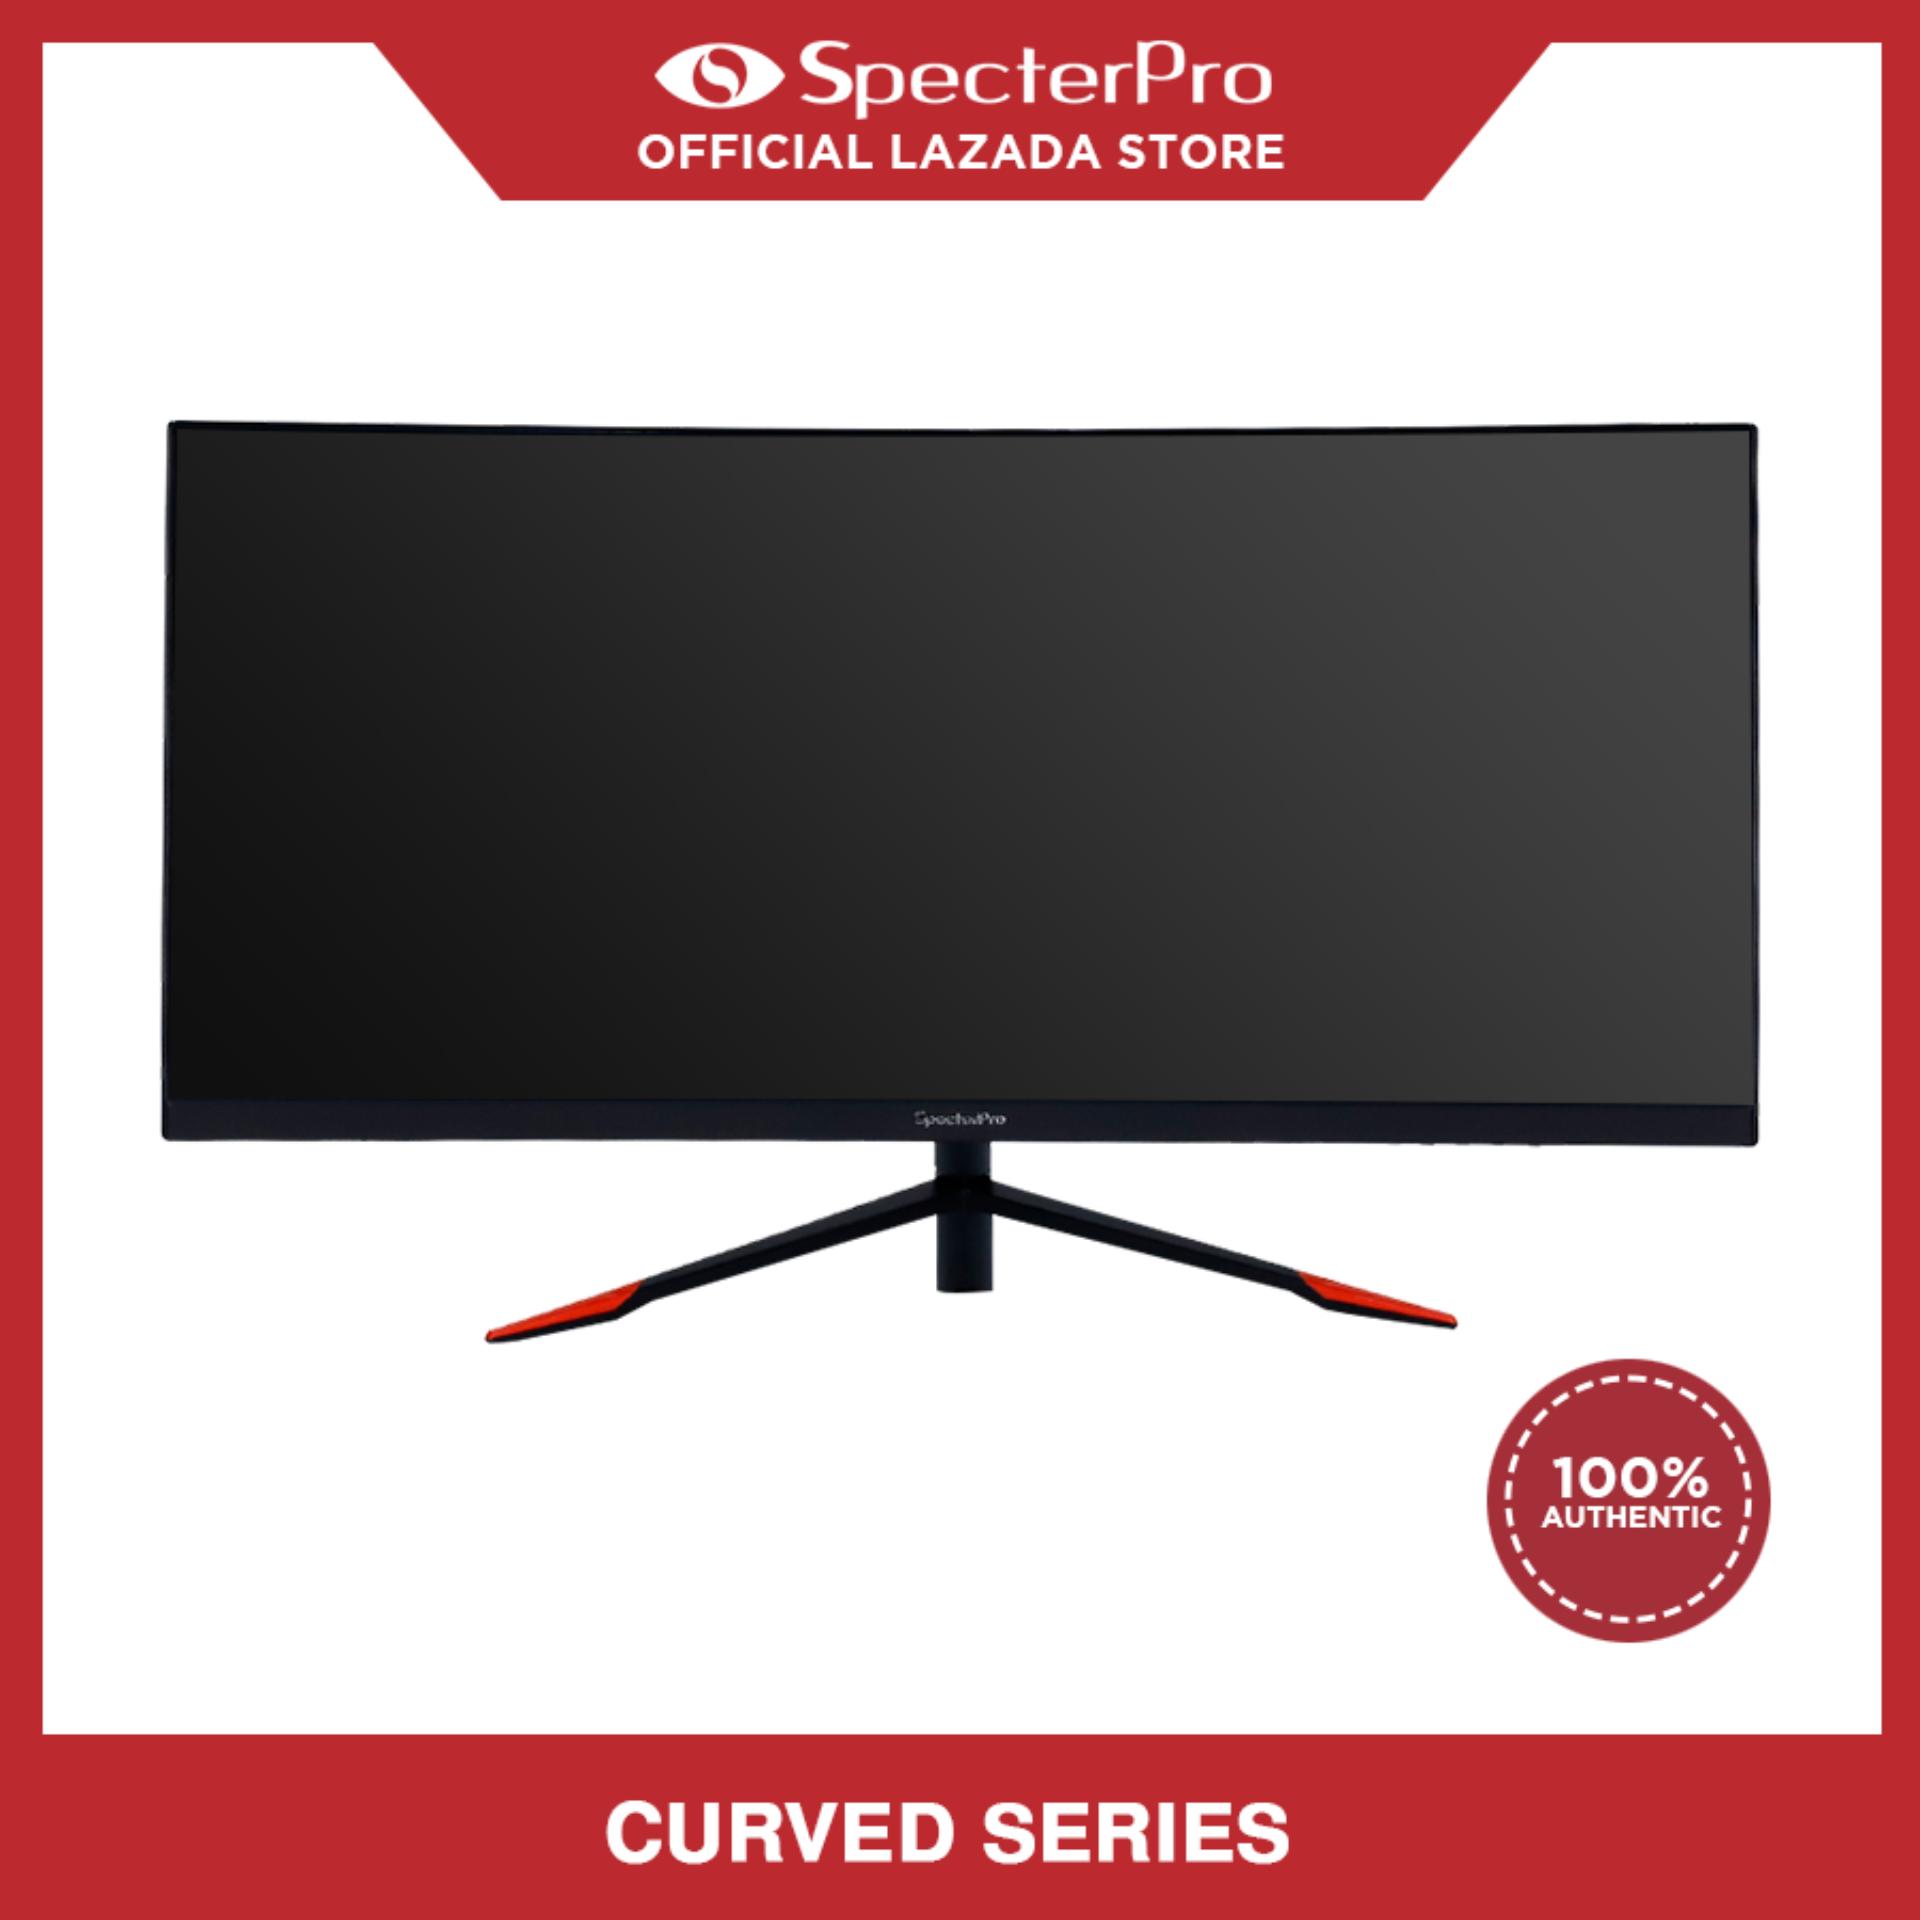 Specterpro Ultrawide 30uw200 30 Va Panel 200hz Frameless And Slim Design Curved Gaming Monitor Best Choice For Icafe And Esports Hub 4ms Response